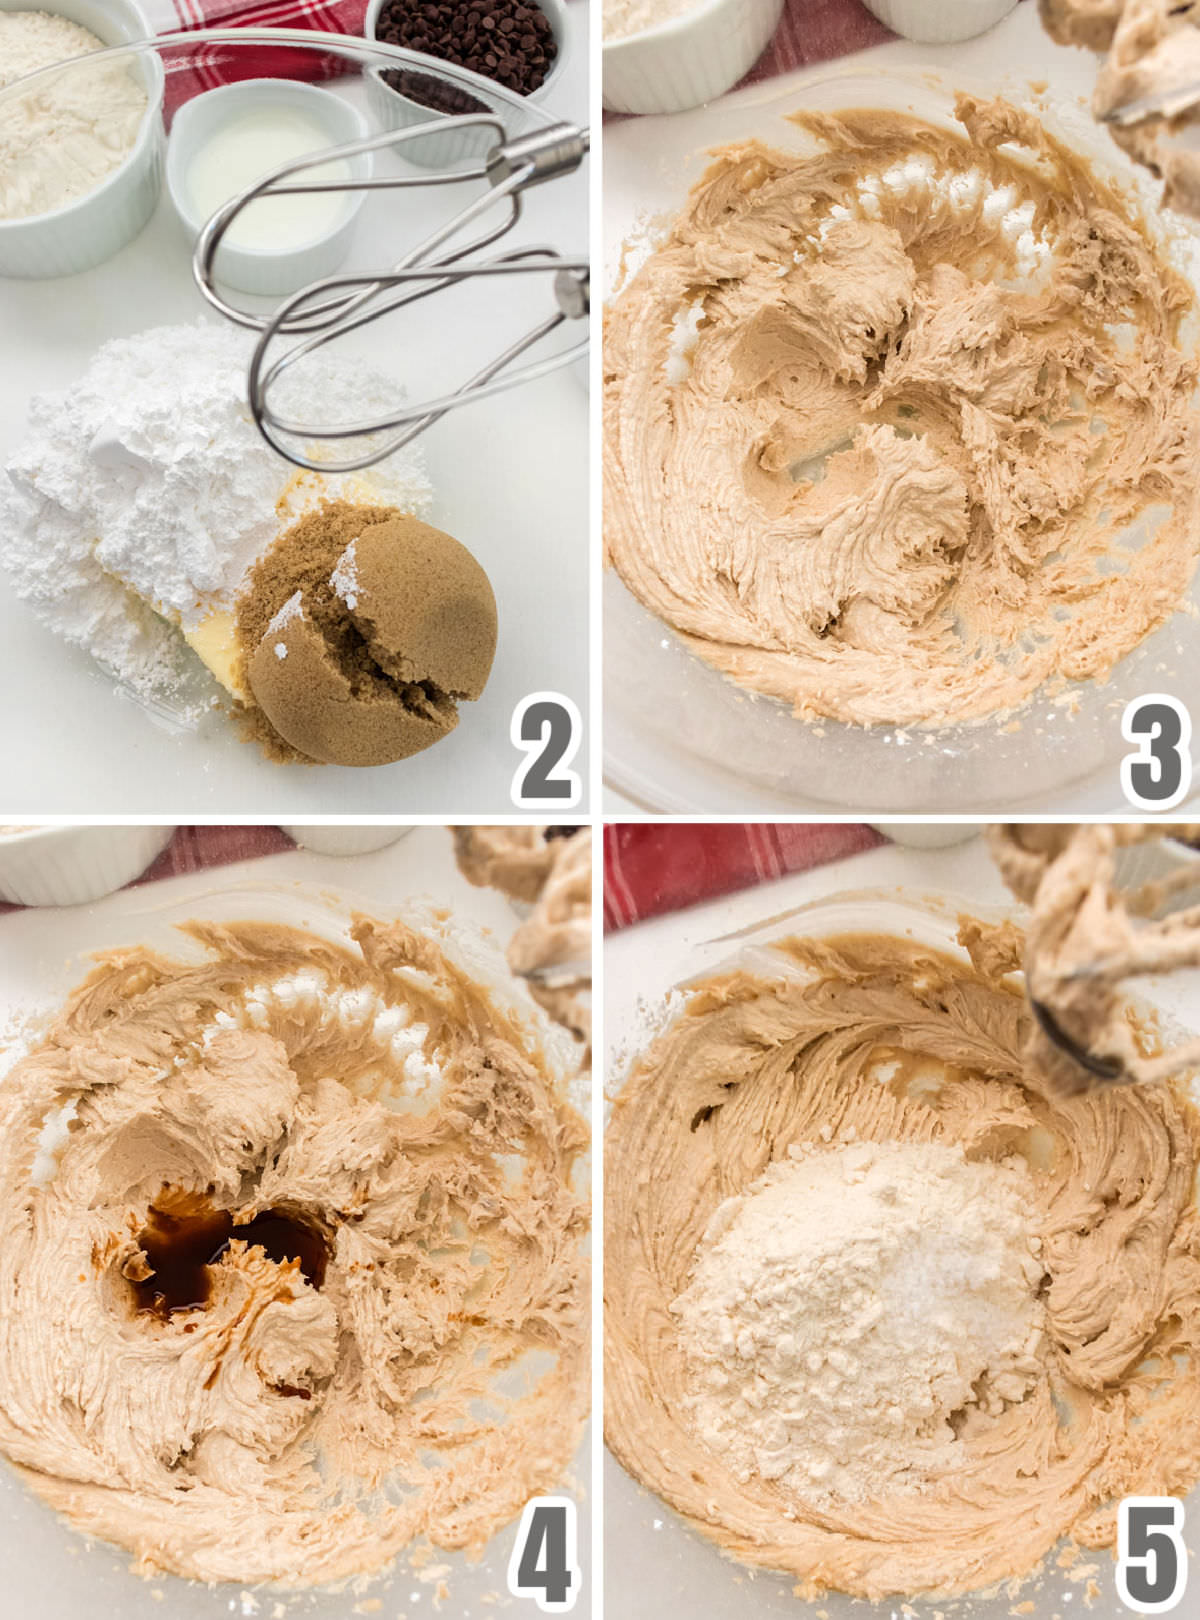 Collage image showing how to make the Edible Cookie Dough.